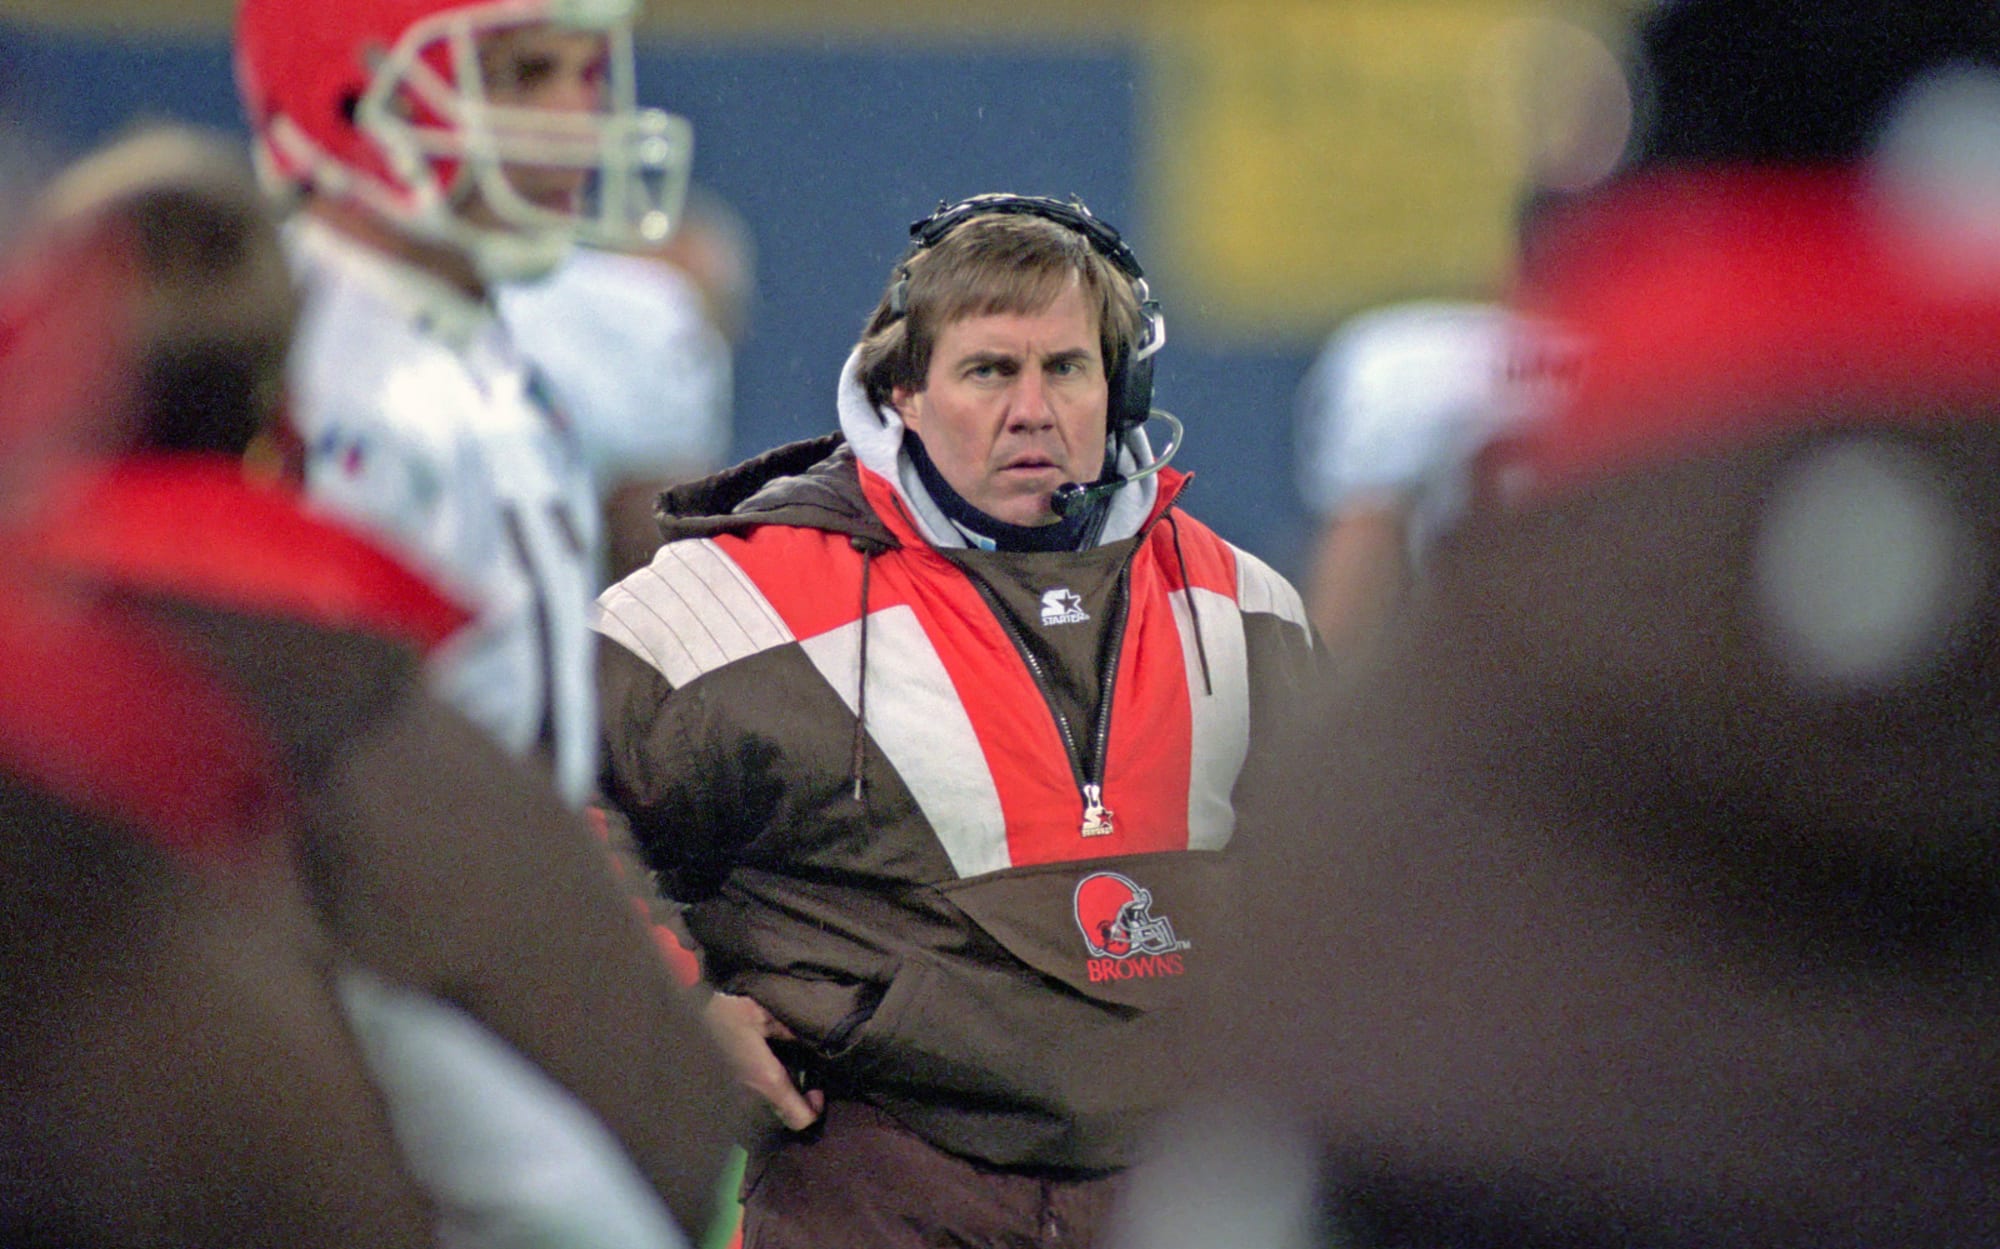 Patriots: A look back at Bill Belichick's head coaching days in Cleveland